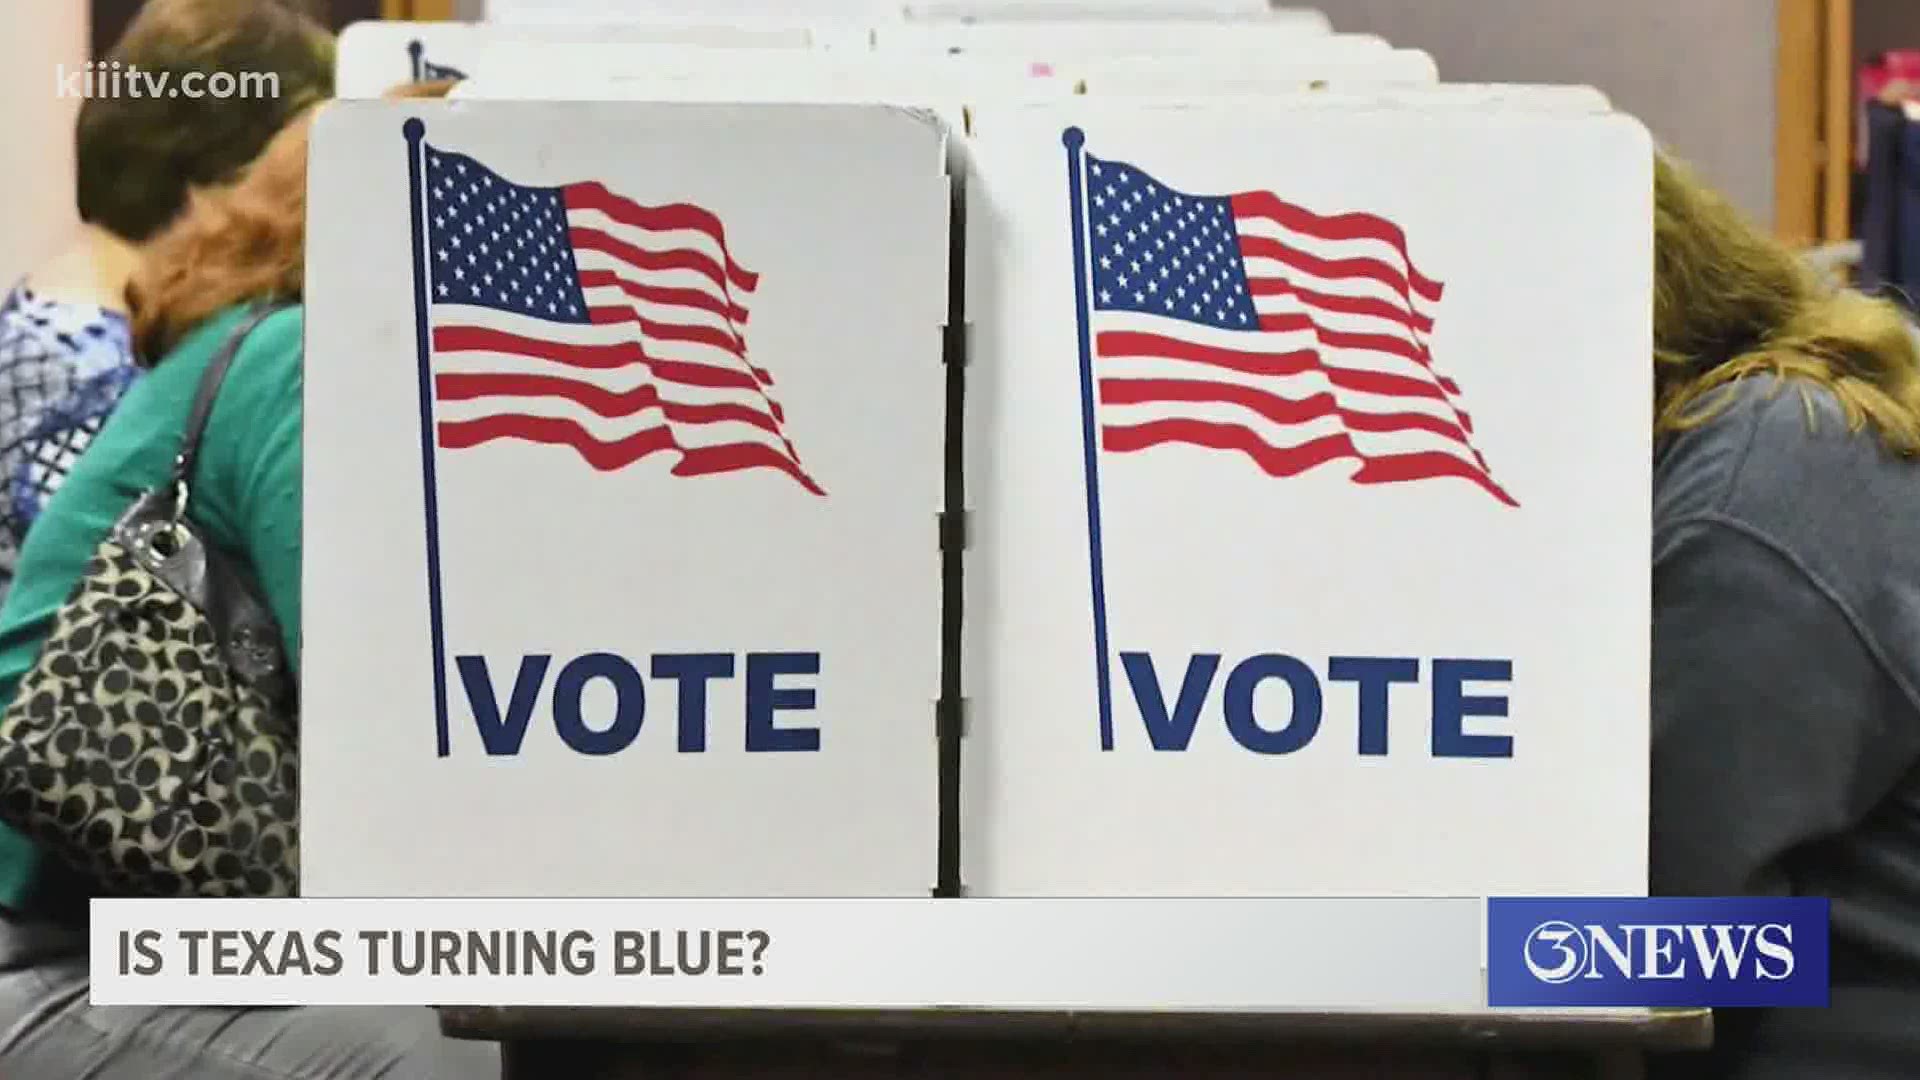 3News spoke with local professors and the different party chairs to explain the economic changes throughout our state that are making an impact this election season.